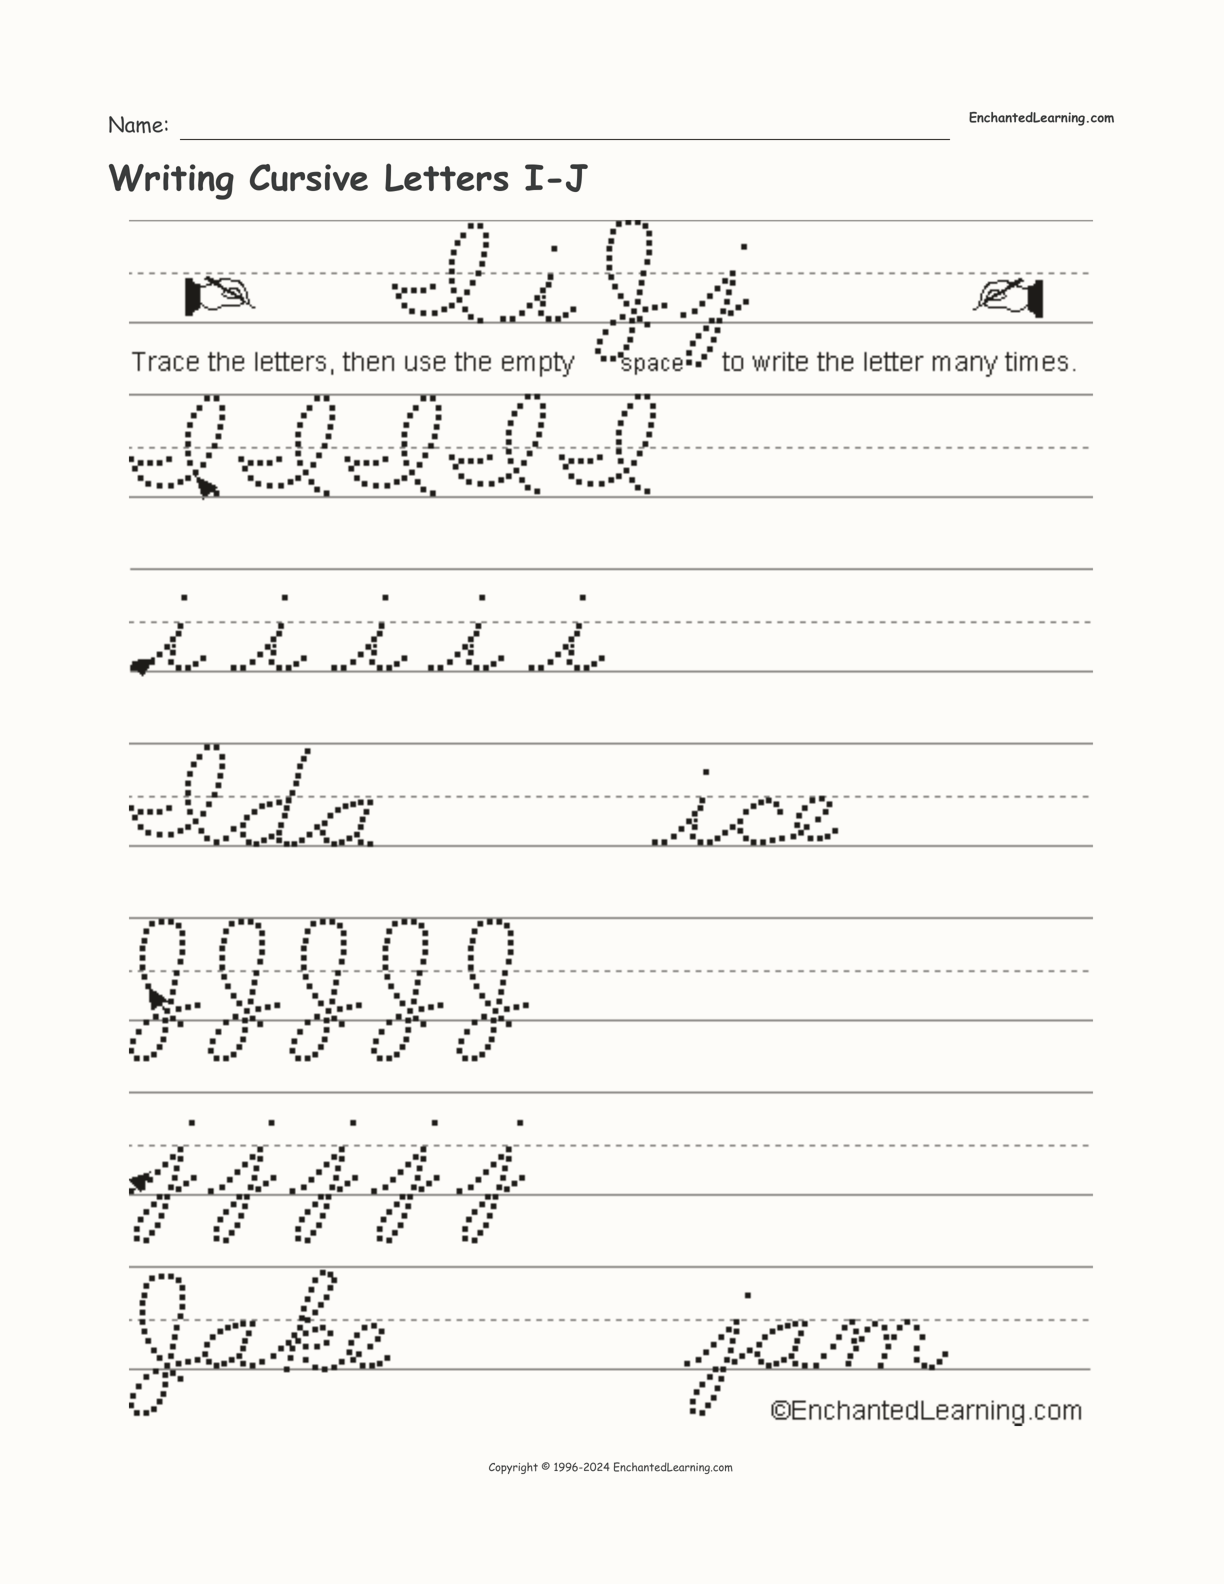 Writing Cursive Letters I-J interactive worksheet page 1